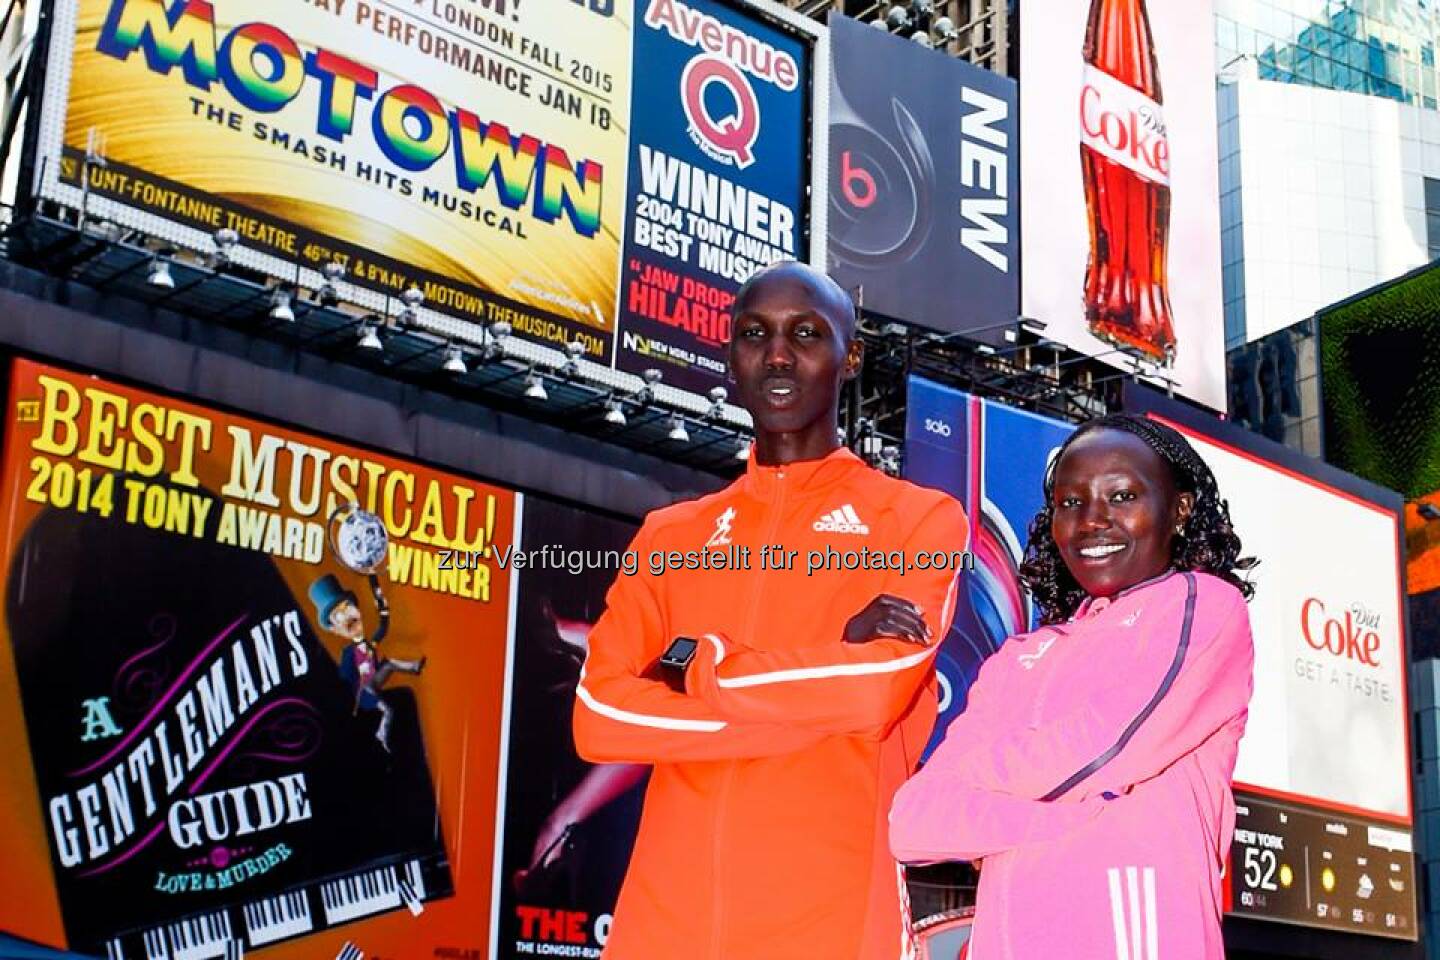 adidas: The choice of champions is #boost. 
Wilson Kipsang (2:10:59) and Mary Keitany (2:25:07) claim the TCS New York City Marathon. #boostNYC  Source: http://facebook.com/adidas